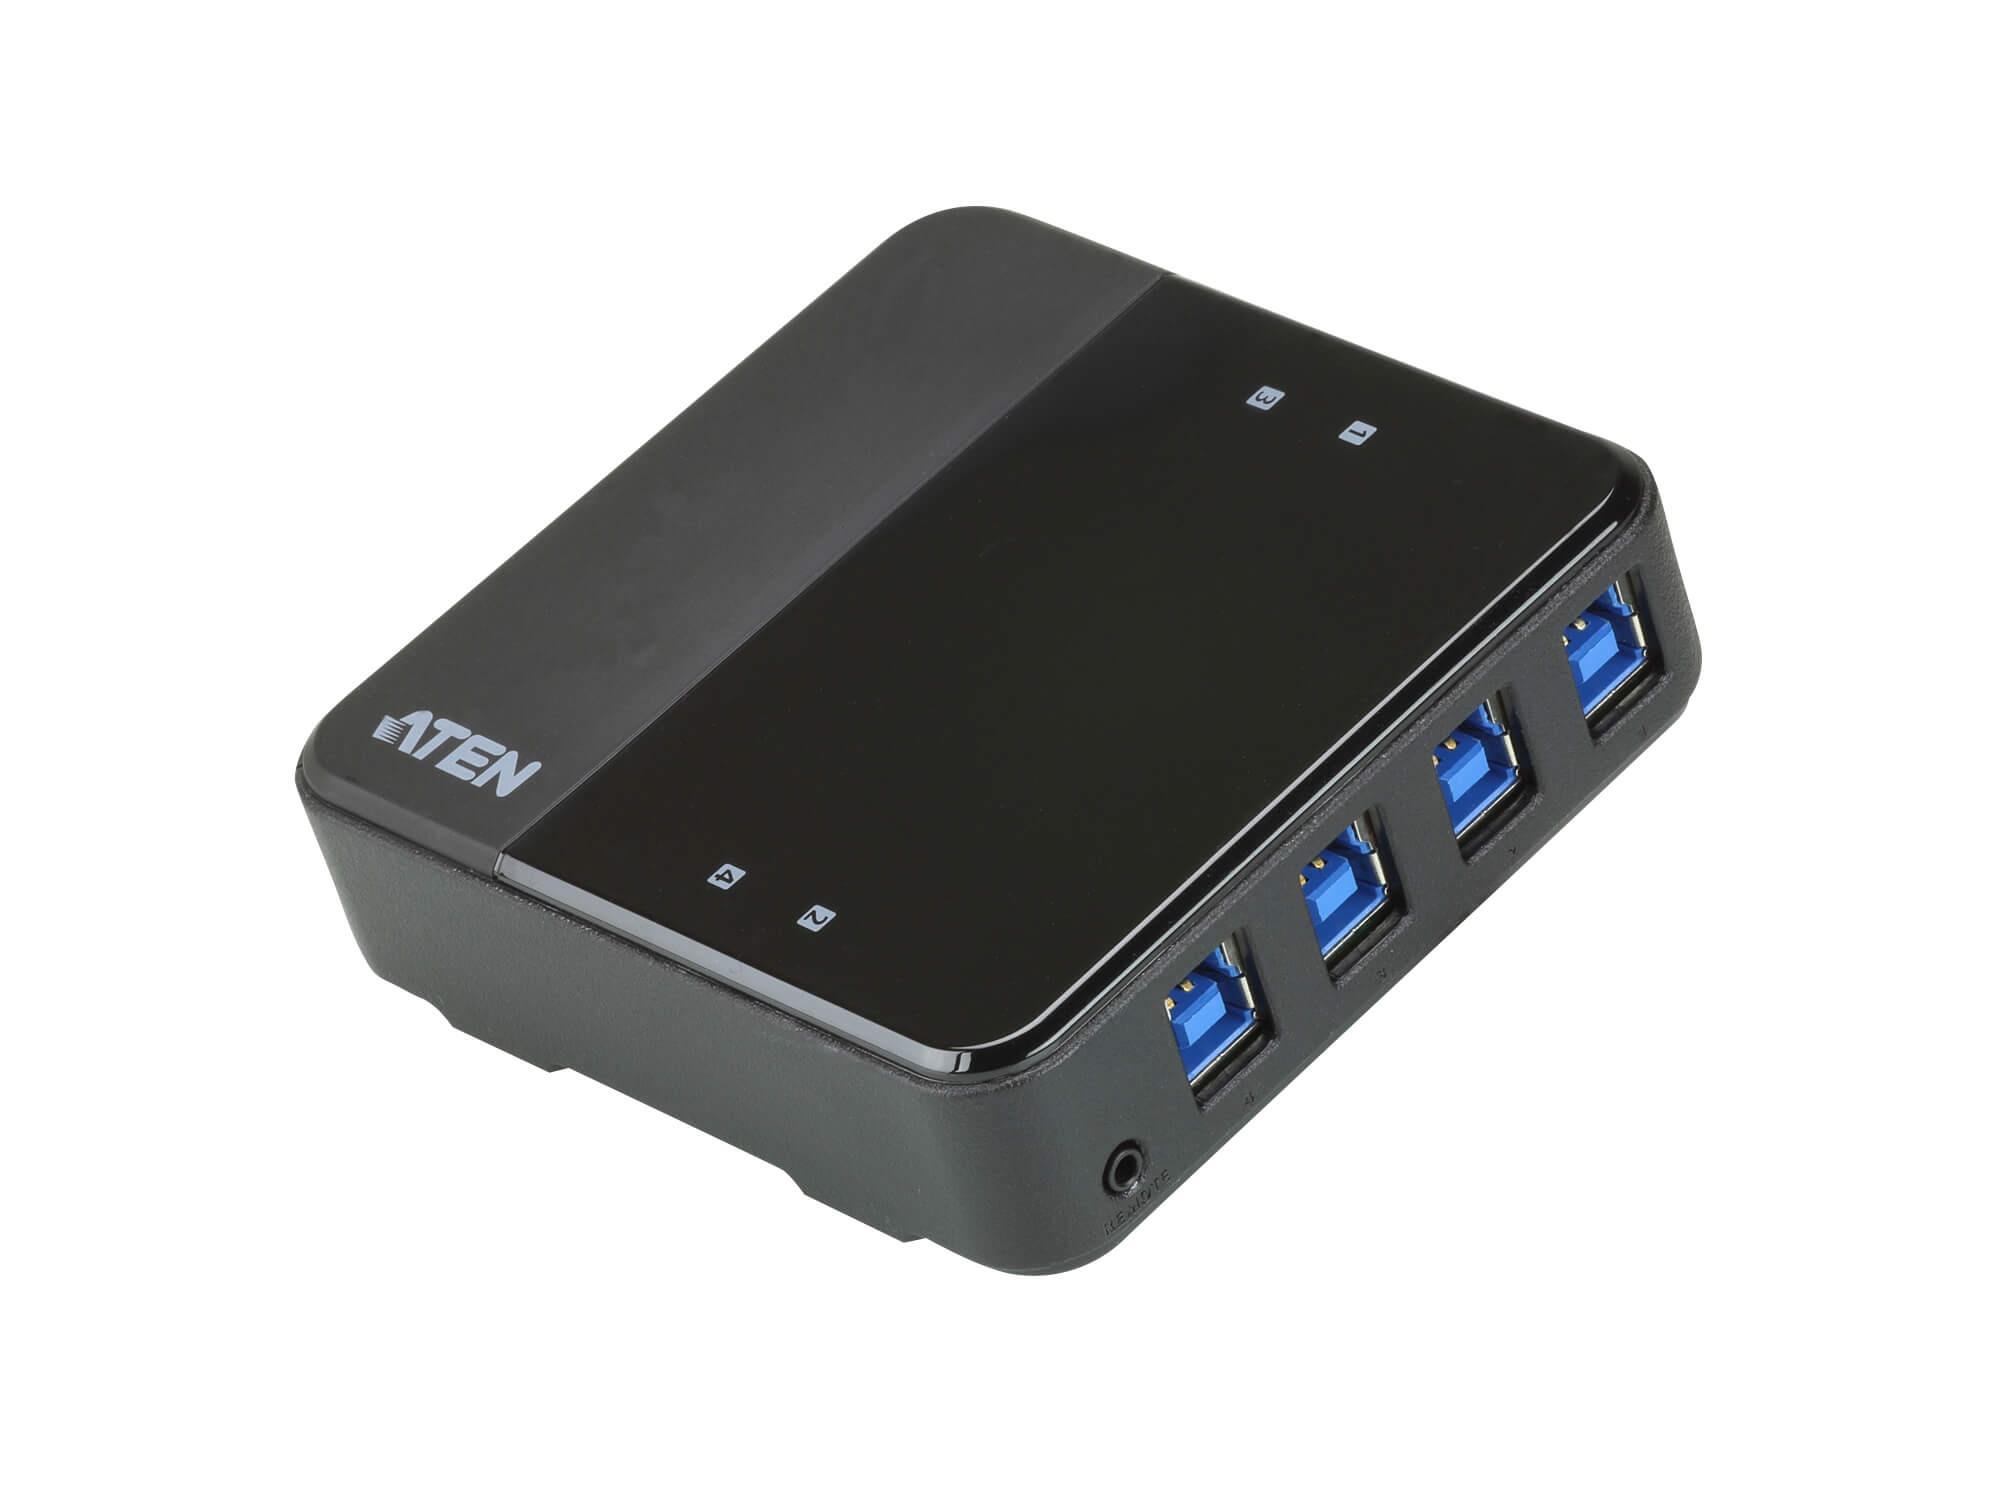 US3344 4 x 4 USB 3.1 Gen1 Peripheral Sharing Switch by Aten